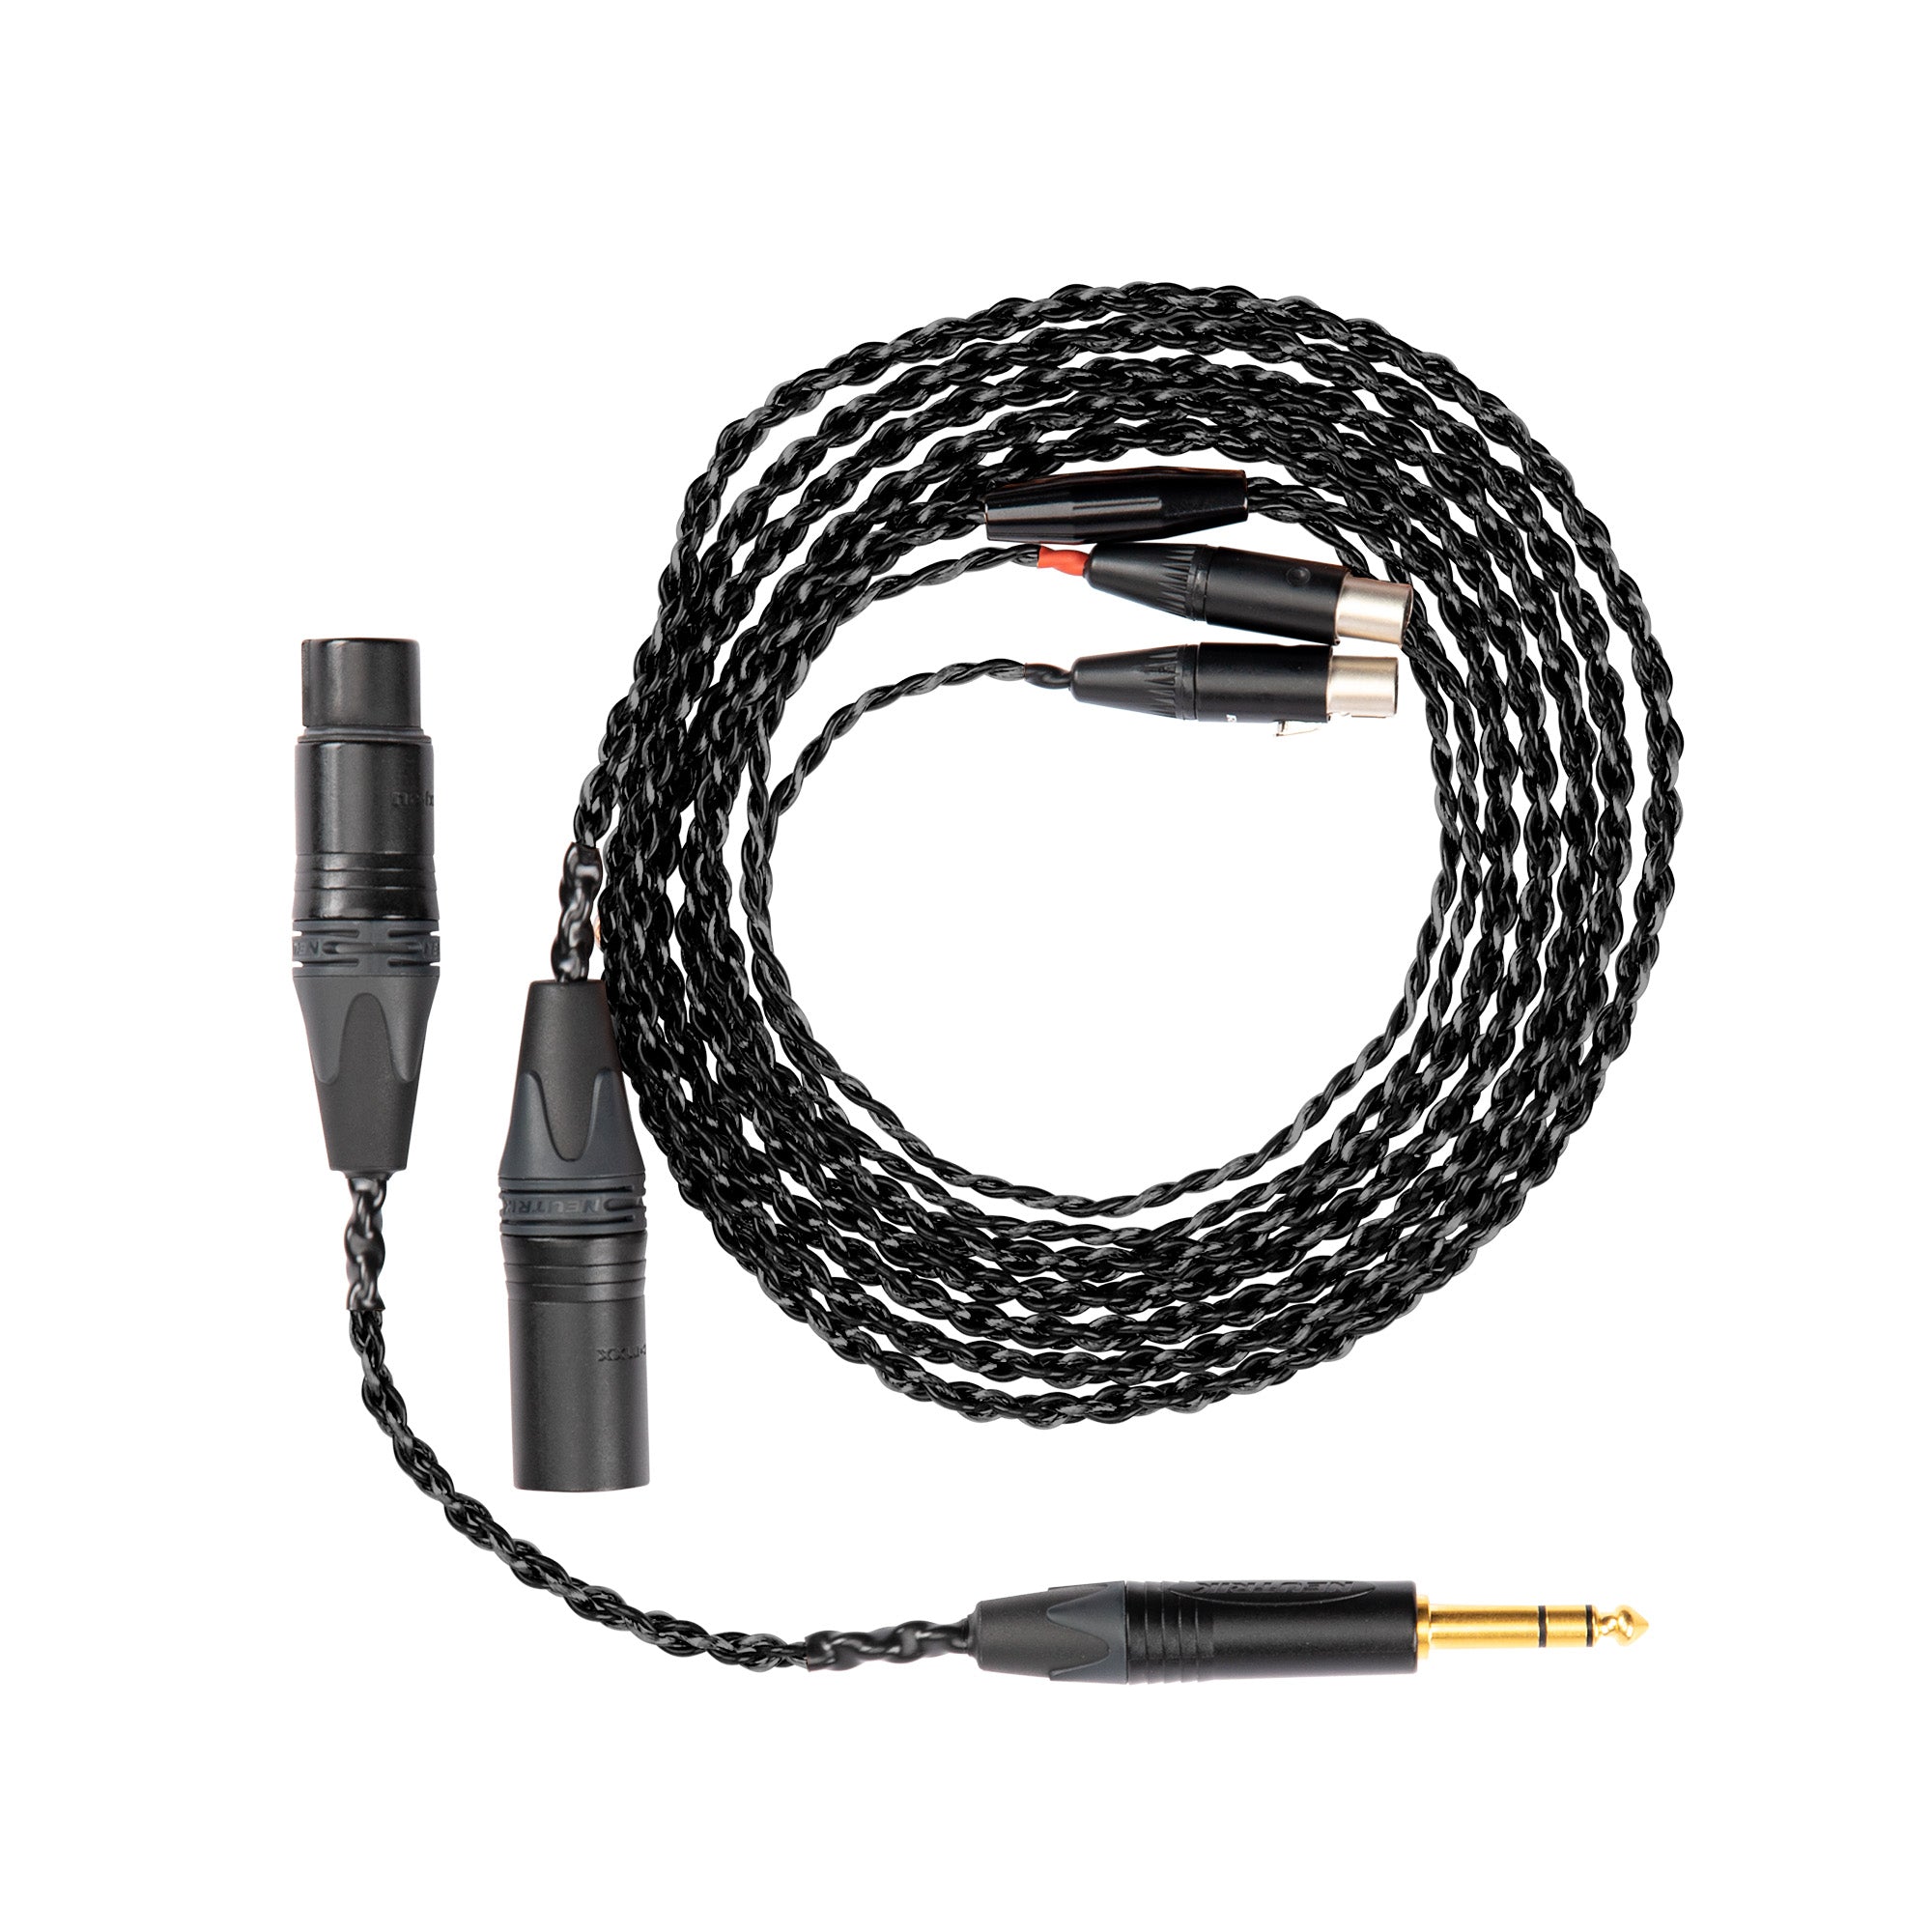 LCD Boom Microphone Cable - Audeze LLC